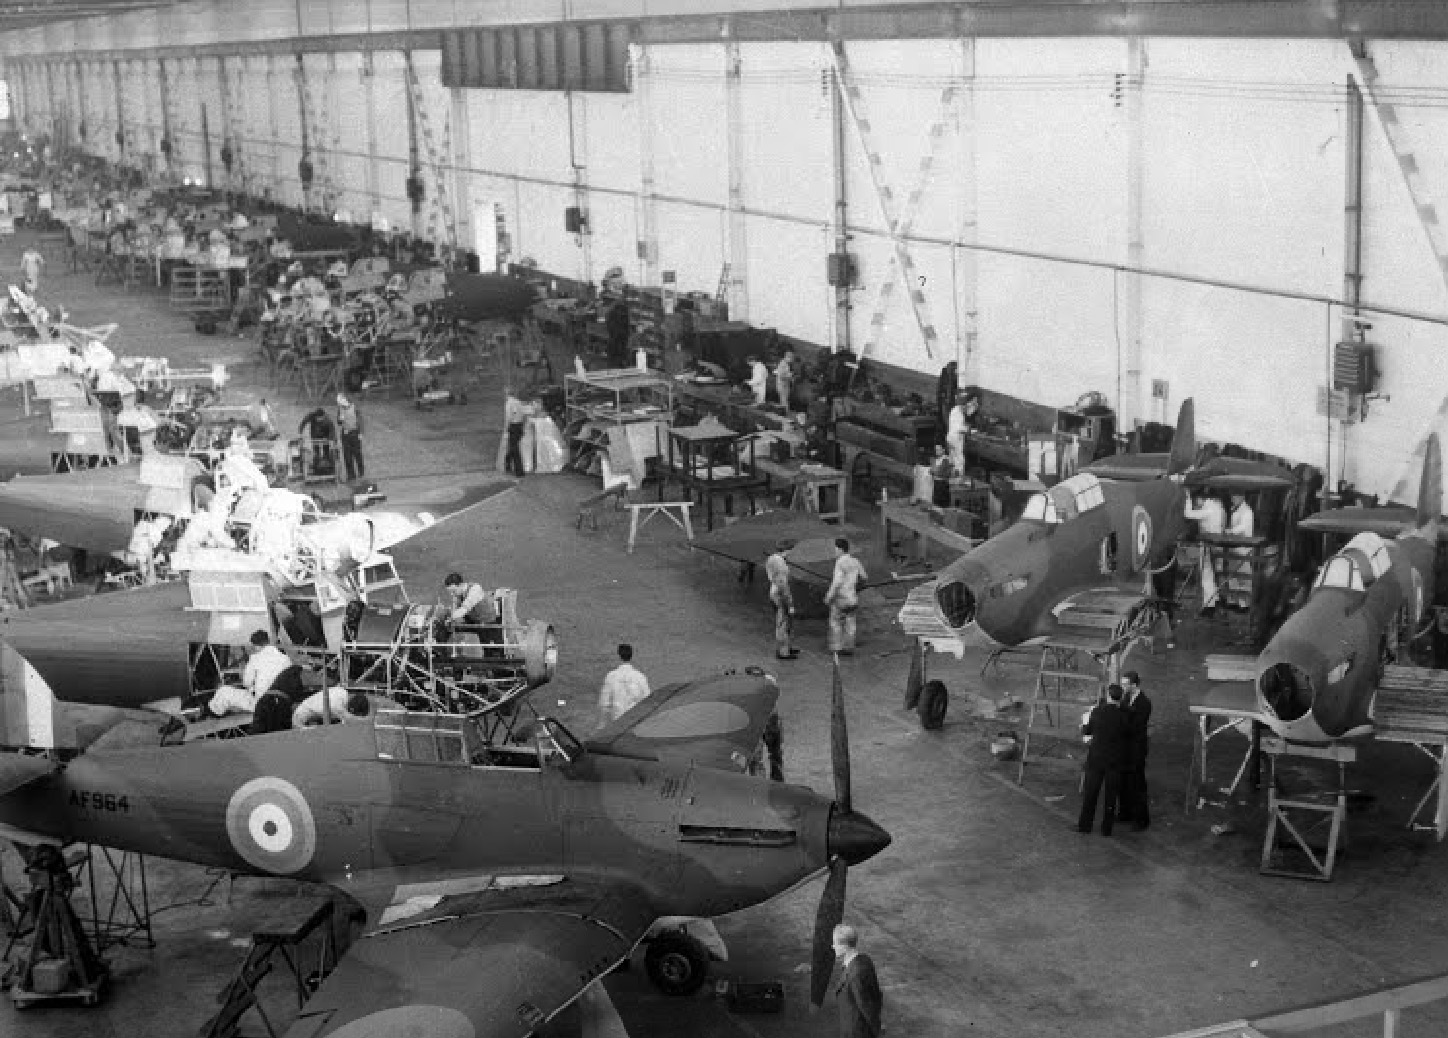 Hawker Hurricane Production Run At Canadian Car & Foundry During Spring 1941